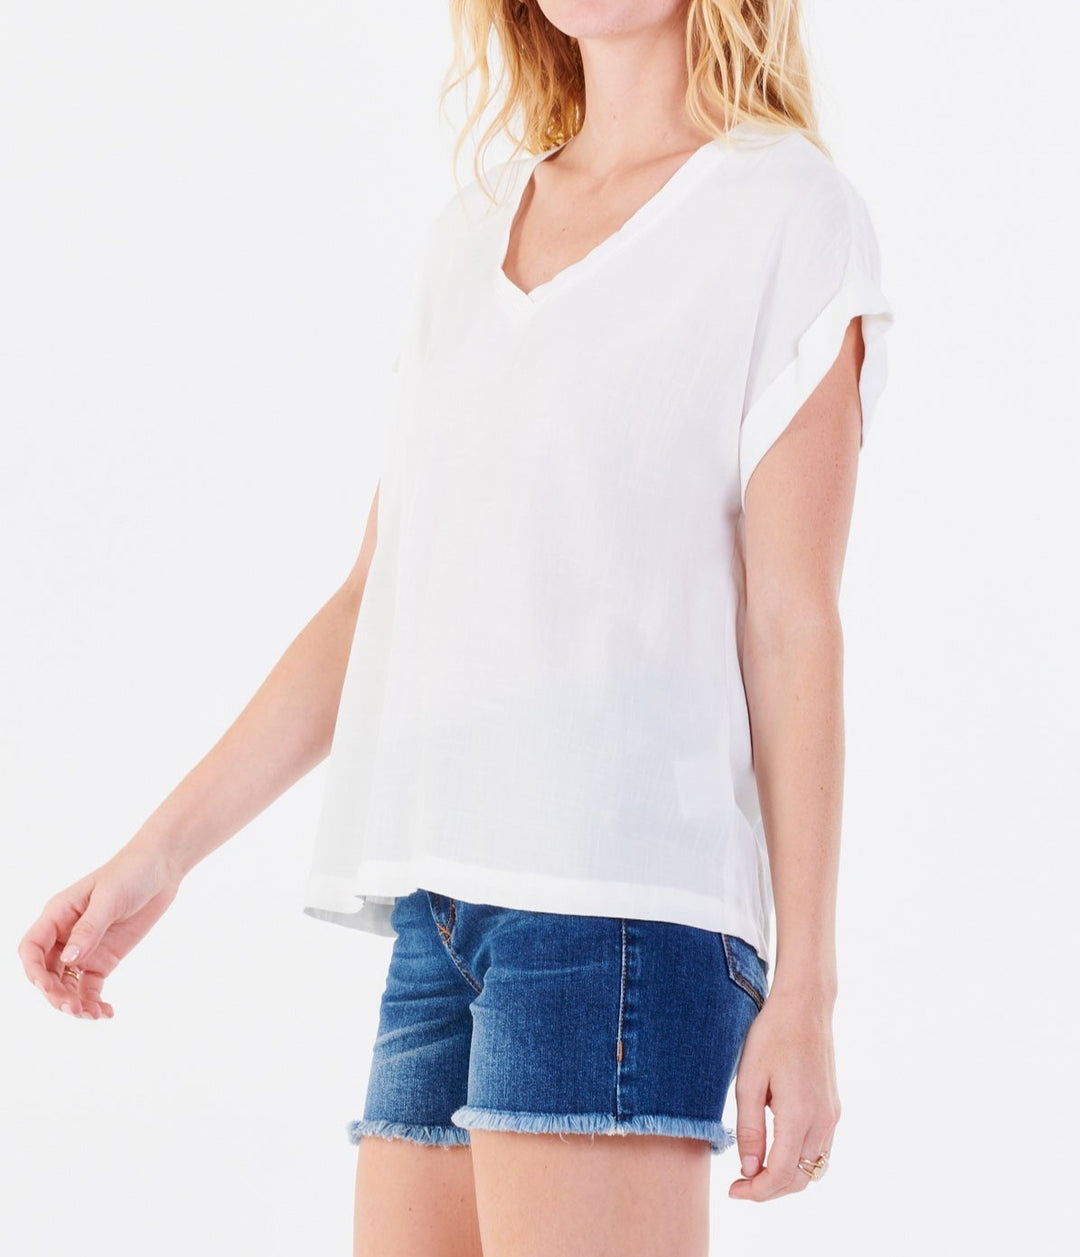 image of a female model wearing a CAMILA DROP SHOULDER TOP WHITE TOPS